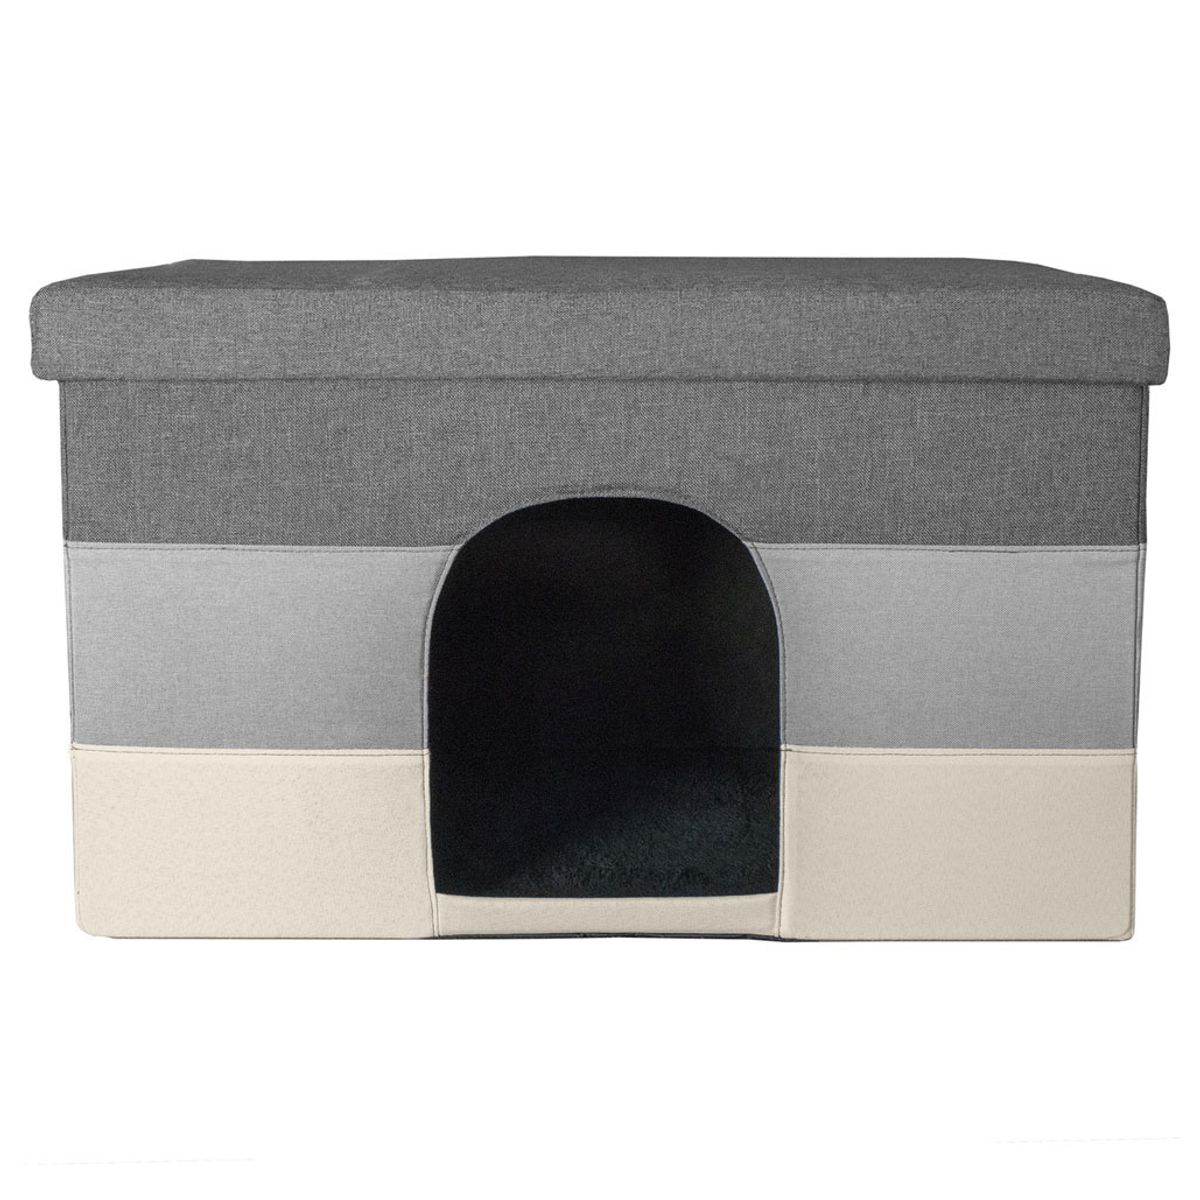 Photos - Bed & Furniture FurHaven Pet House Footstool Ottoman - Small - Hygge Stripe 5426327 